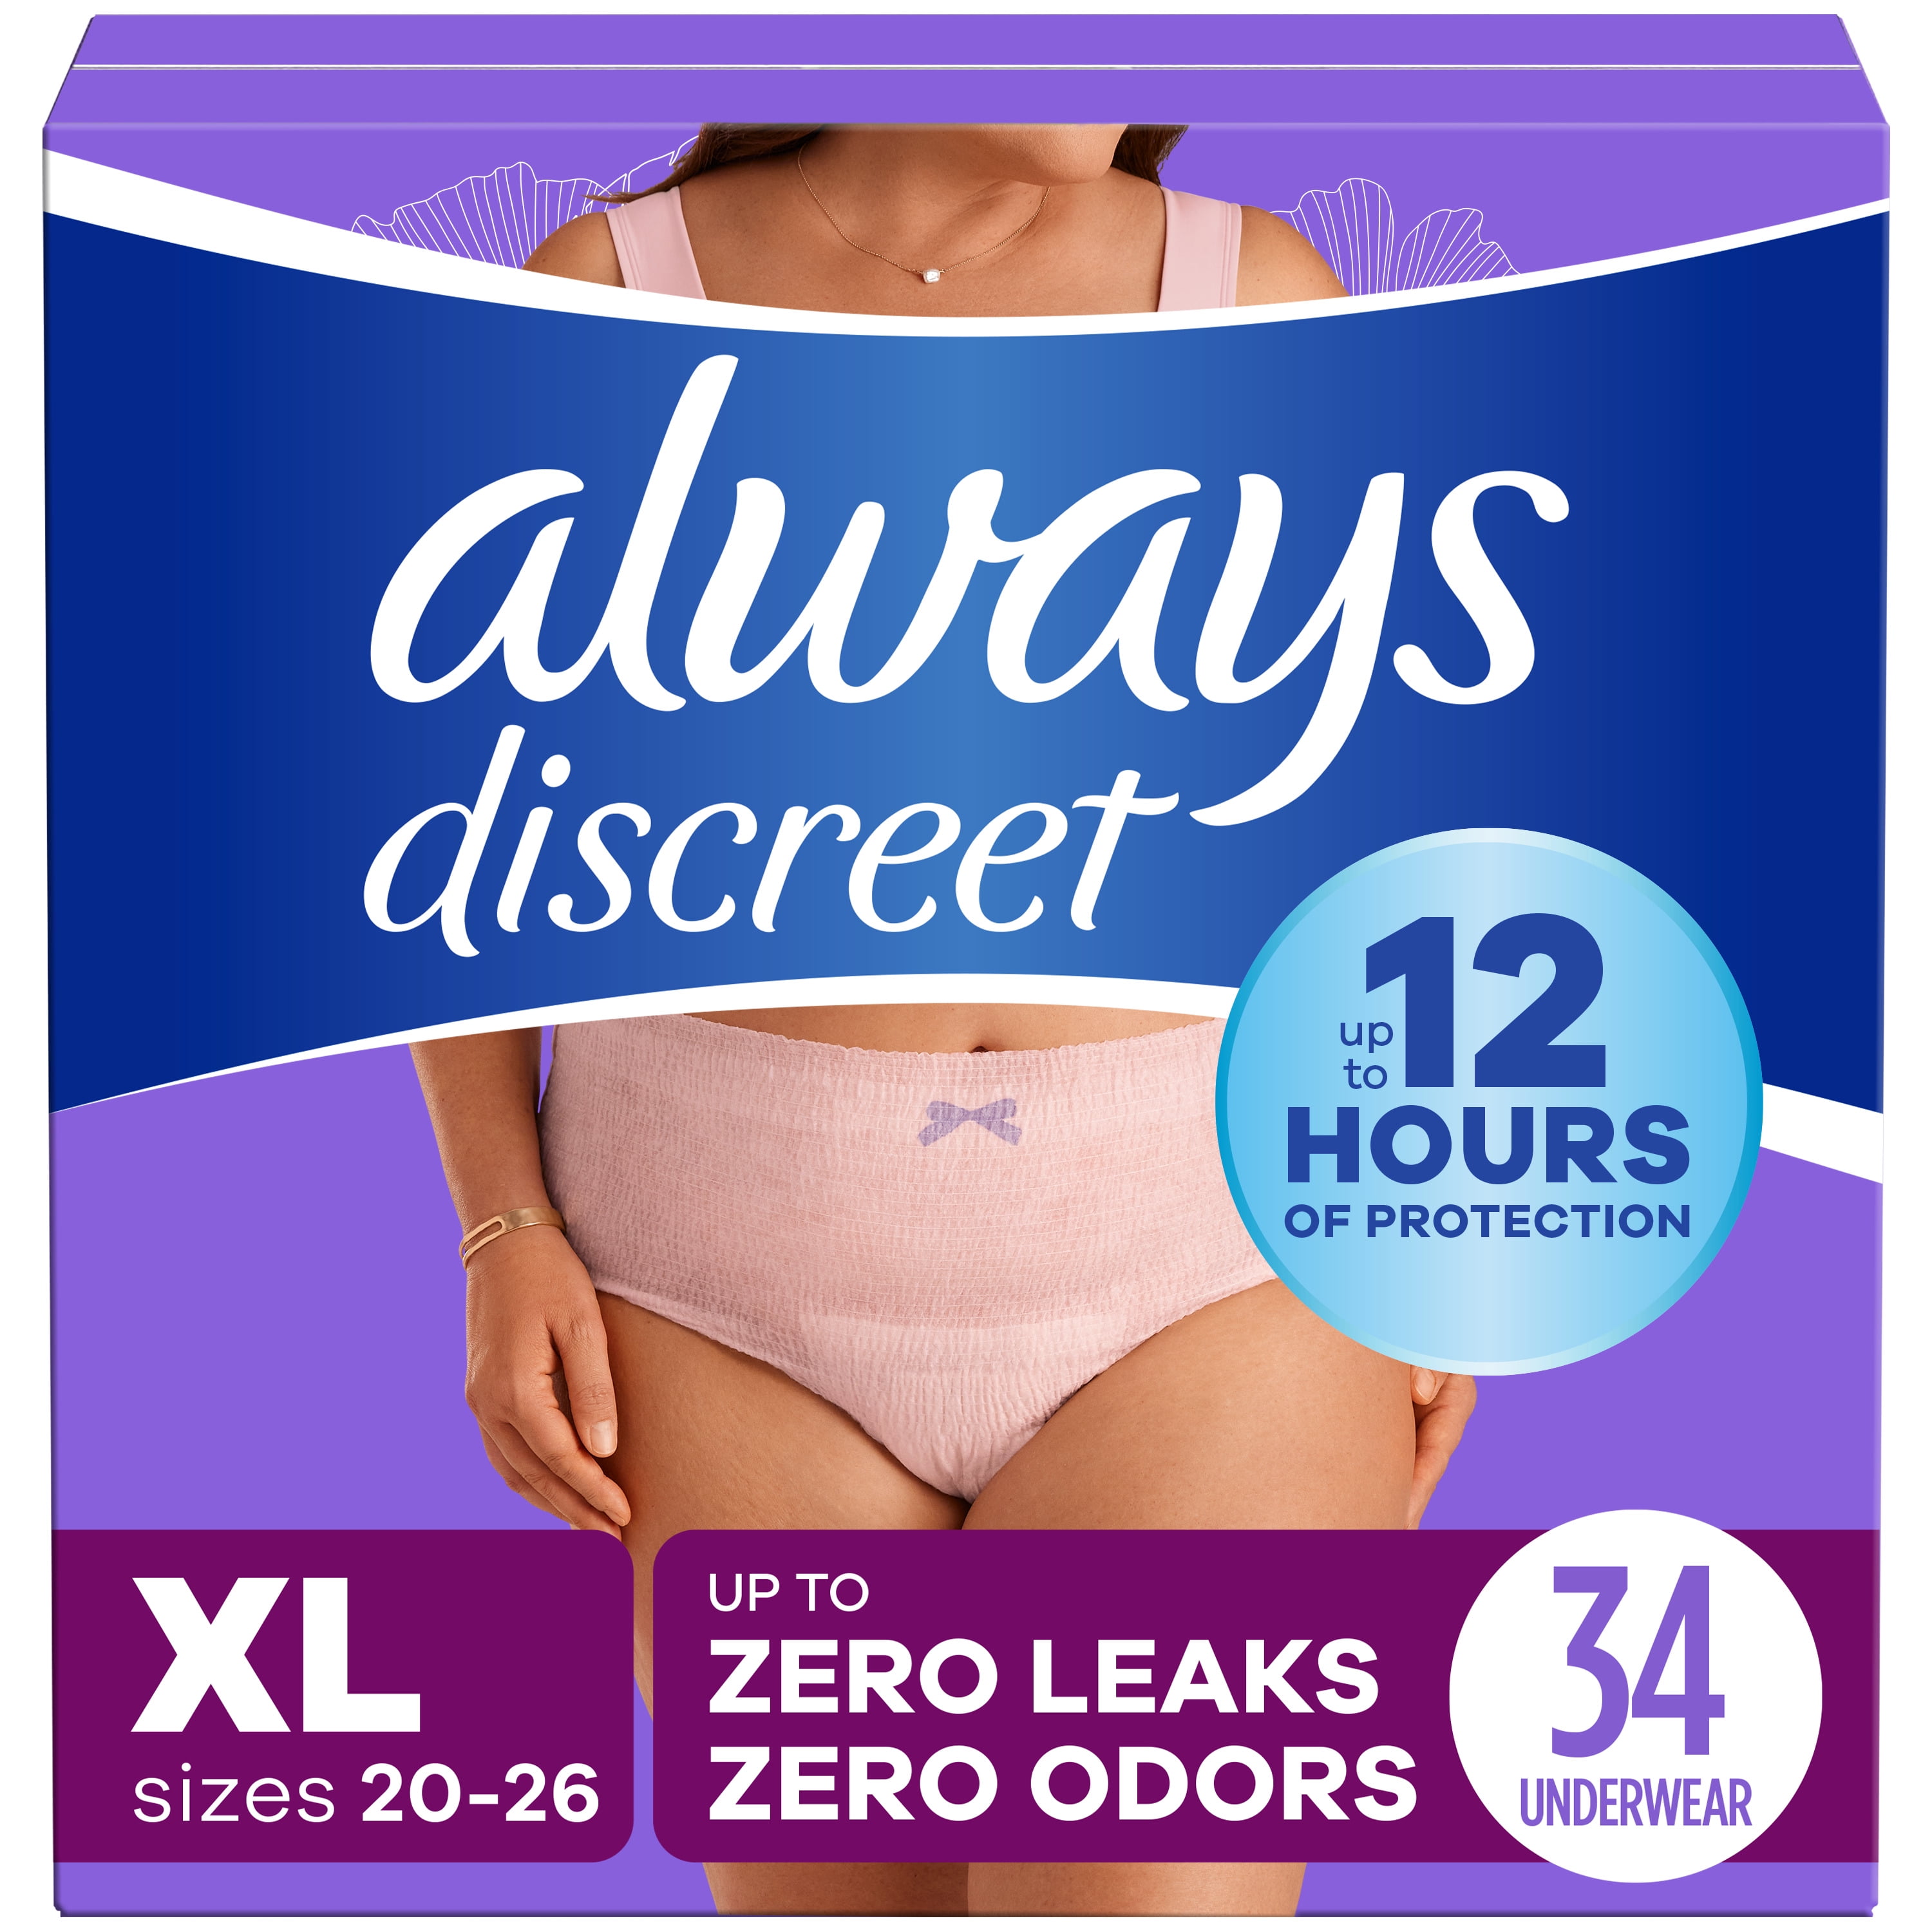 Always Discreet Adult Incontinence Underwear for Women, Size XL, 34 CT